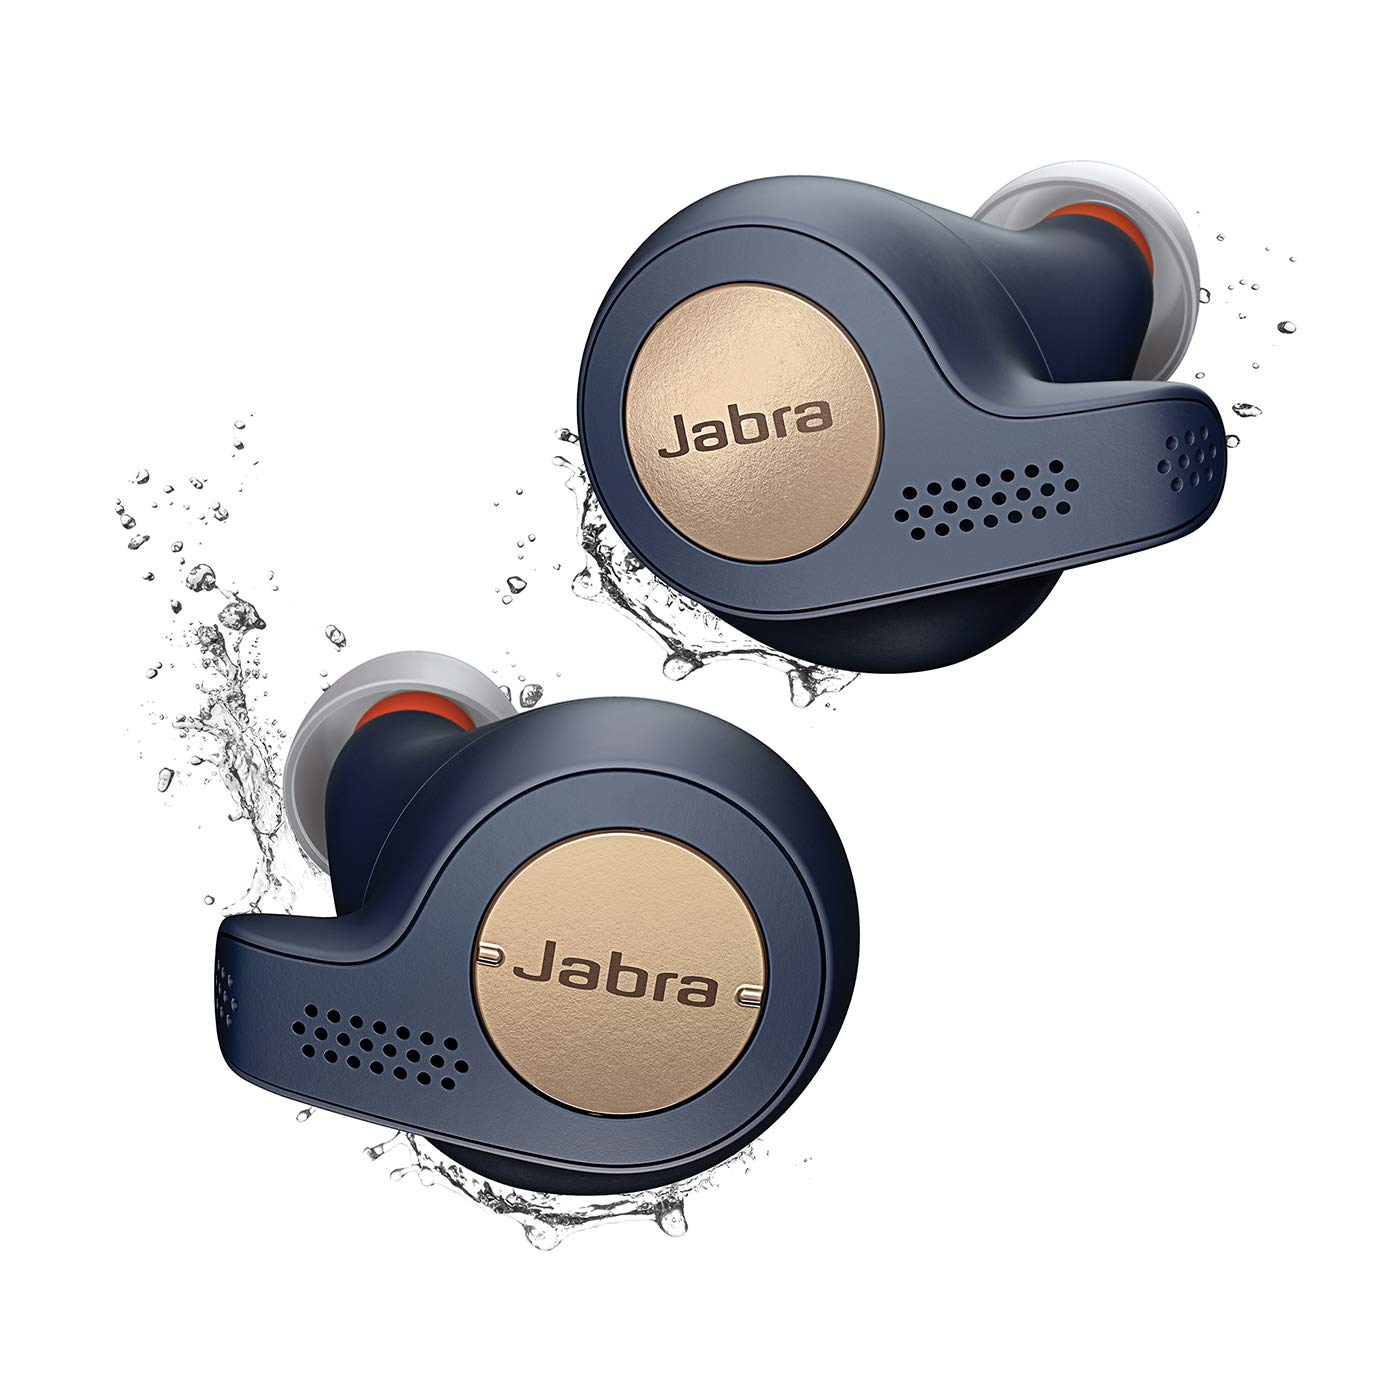 Jabra Elite Active 65t Alexa Enabled True Wireless Sports Earbuds with Charging Case – Copper Blue